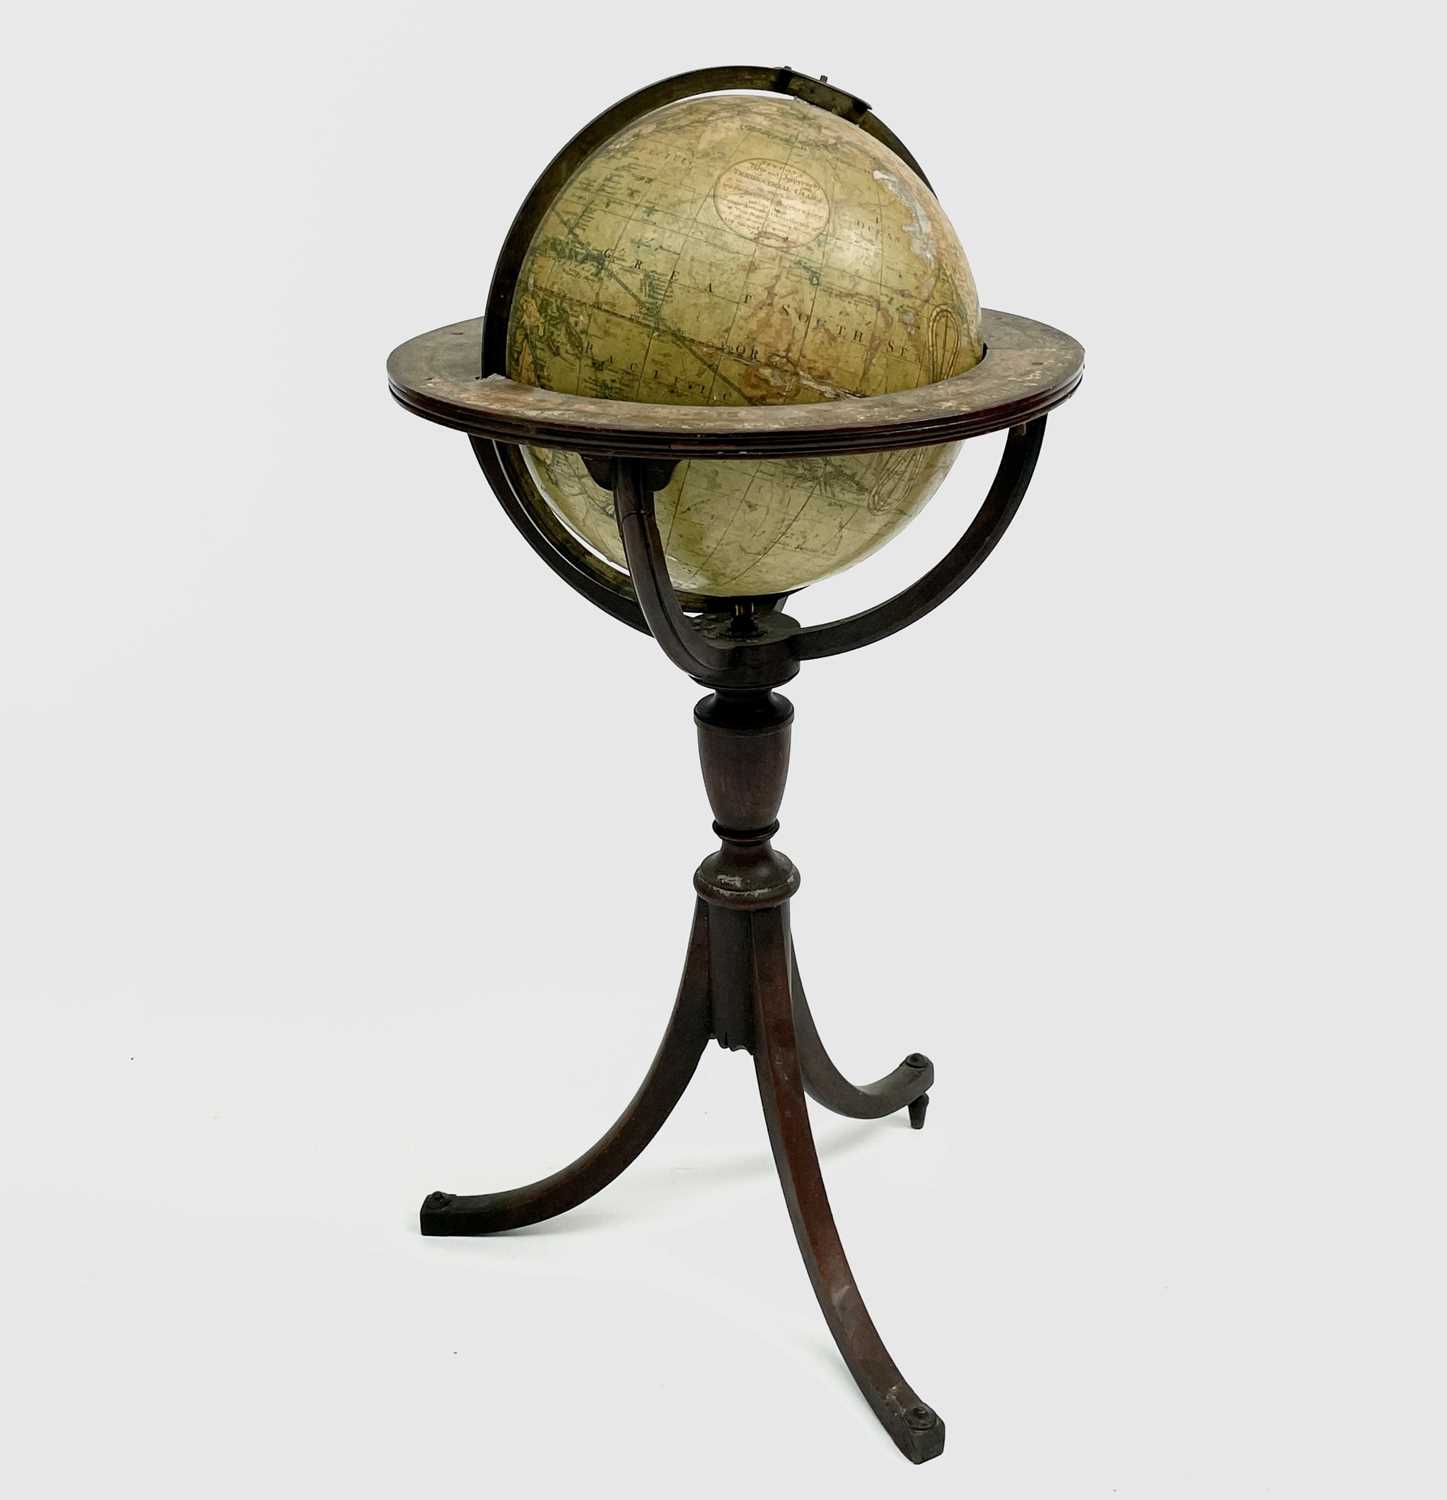 A Newton's New and Improved Terrestrial 12 inch globe, published 1816, with brass meridian circle